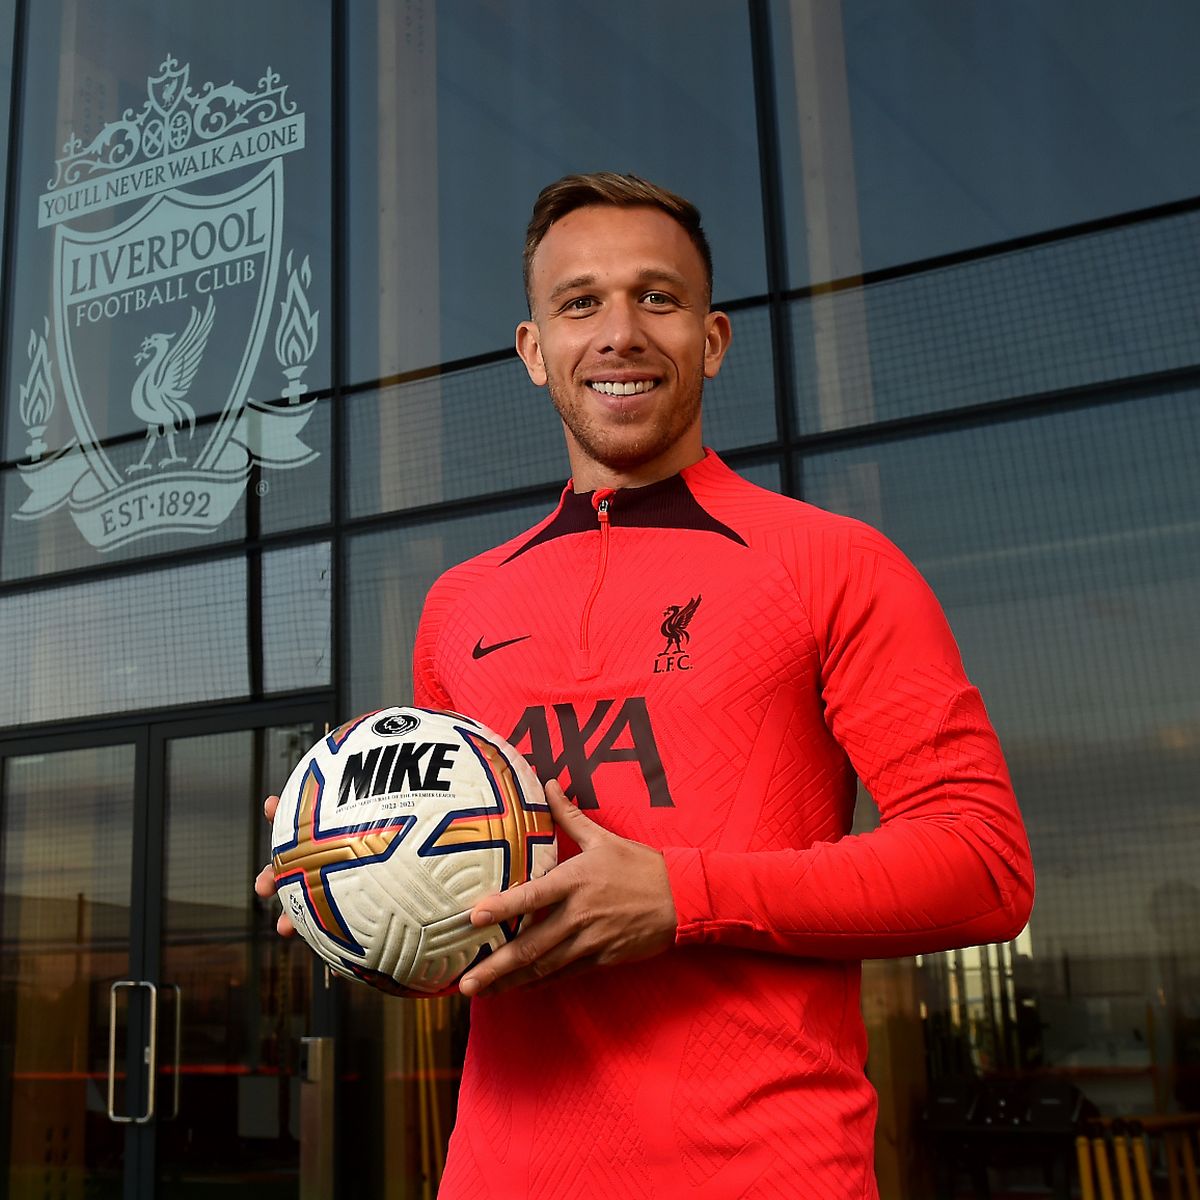 Melo: I’m Eager To Rediscover My Best Football At Liverpool